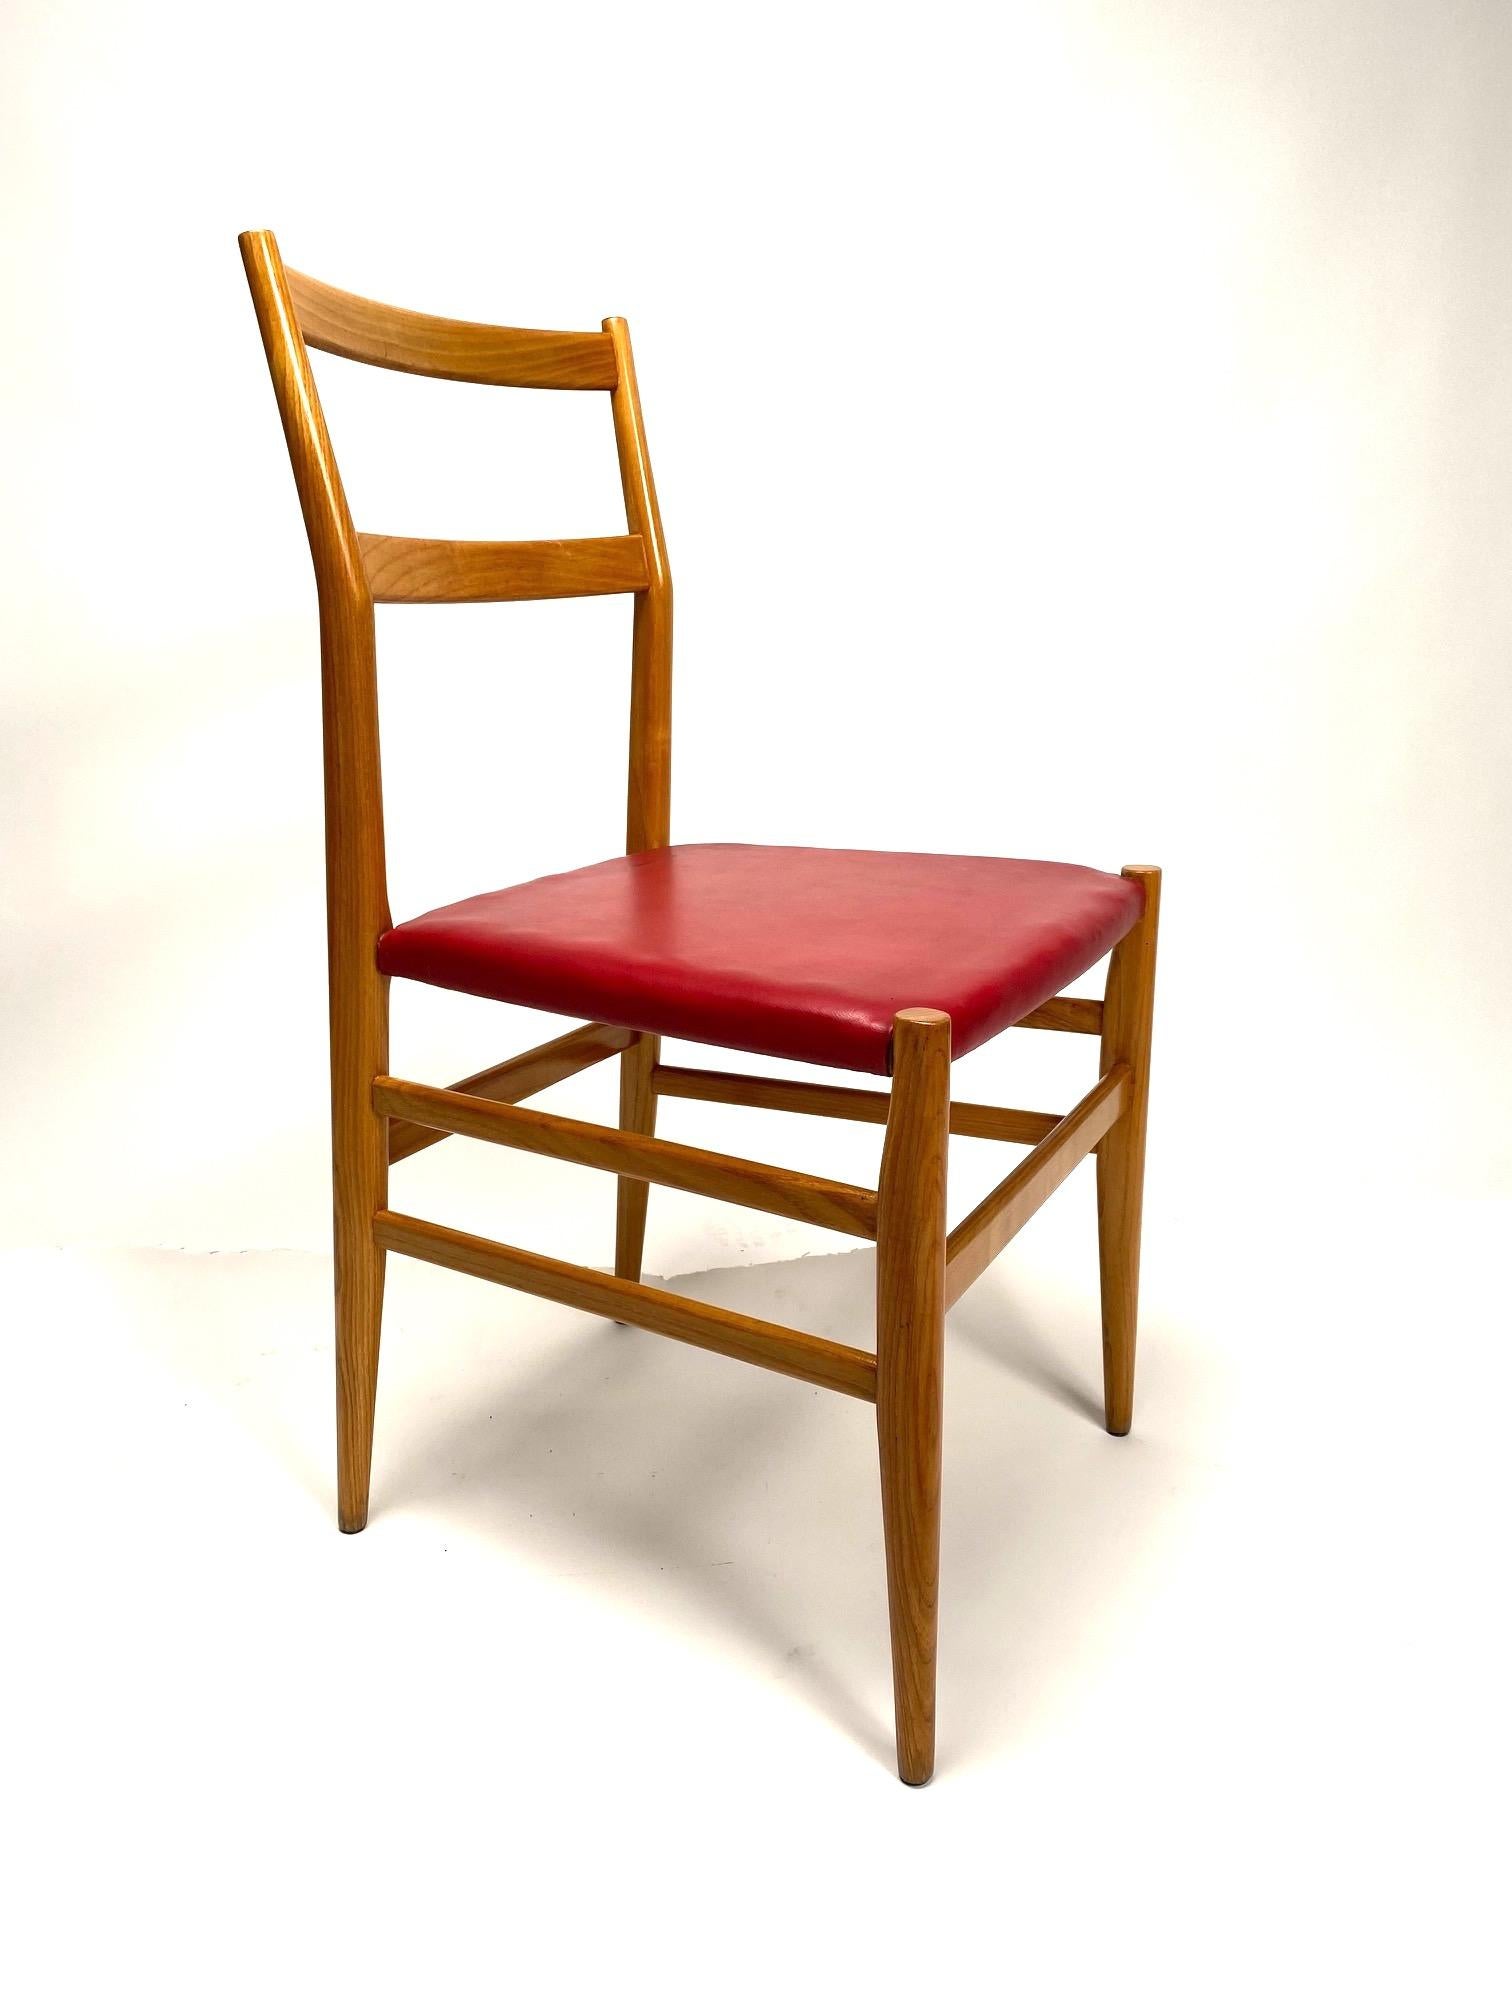 Pair of Leggera chairs in light wood, Gio Ponti, Cassina  (First Edition) For Sale 3